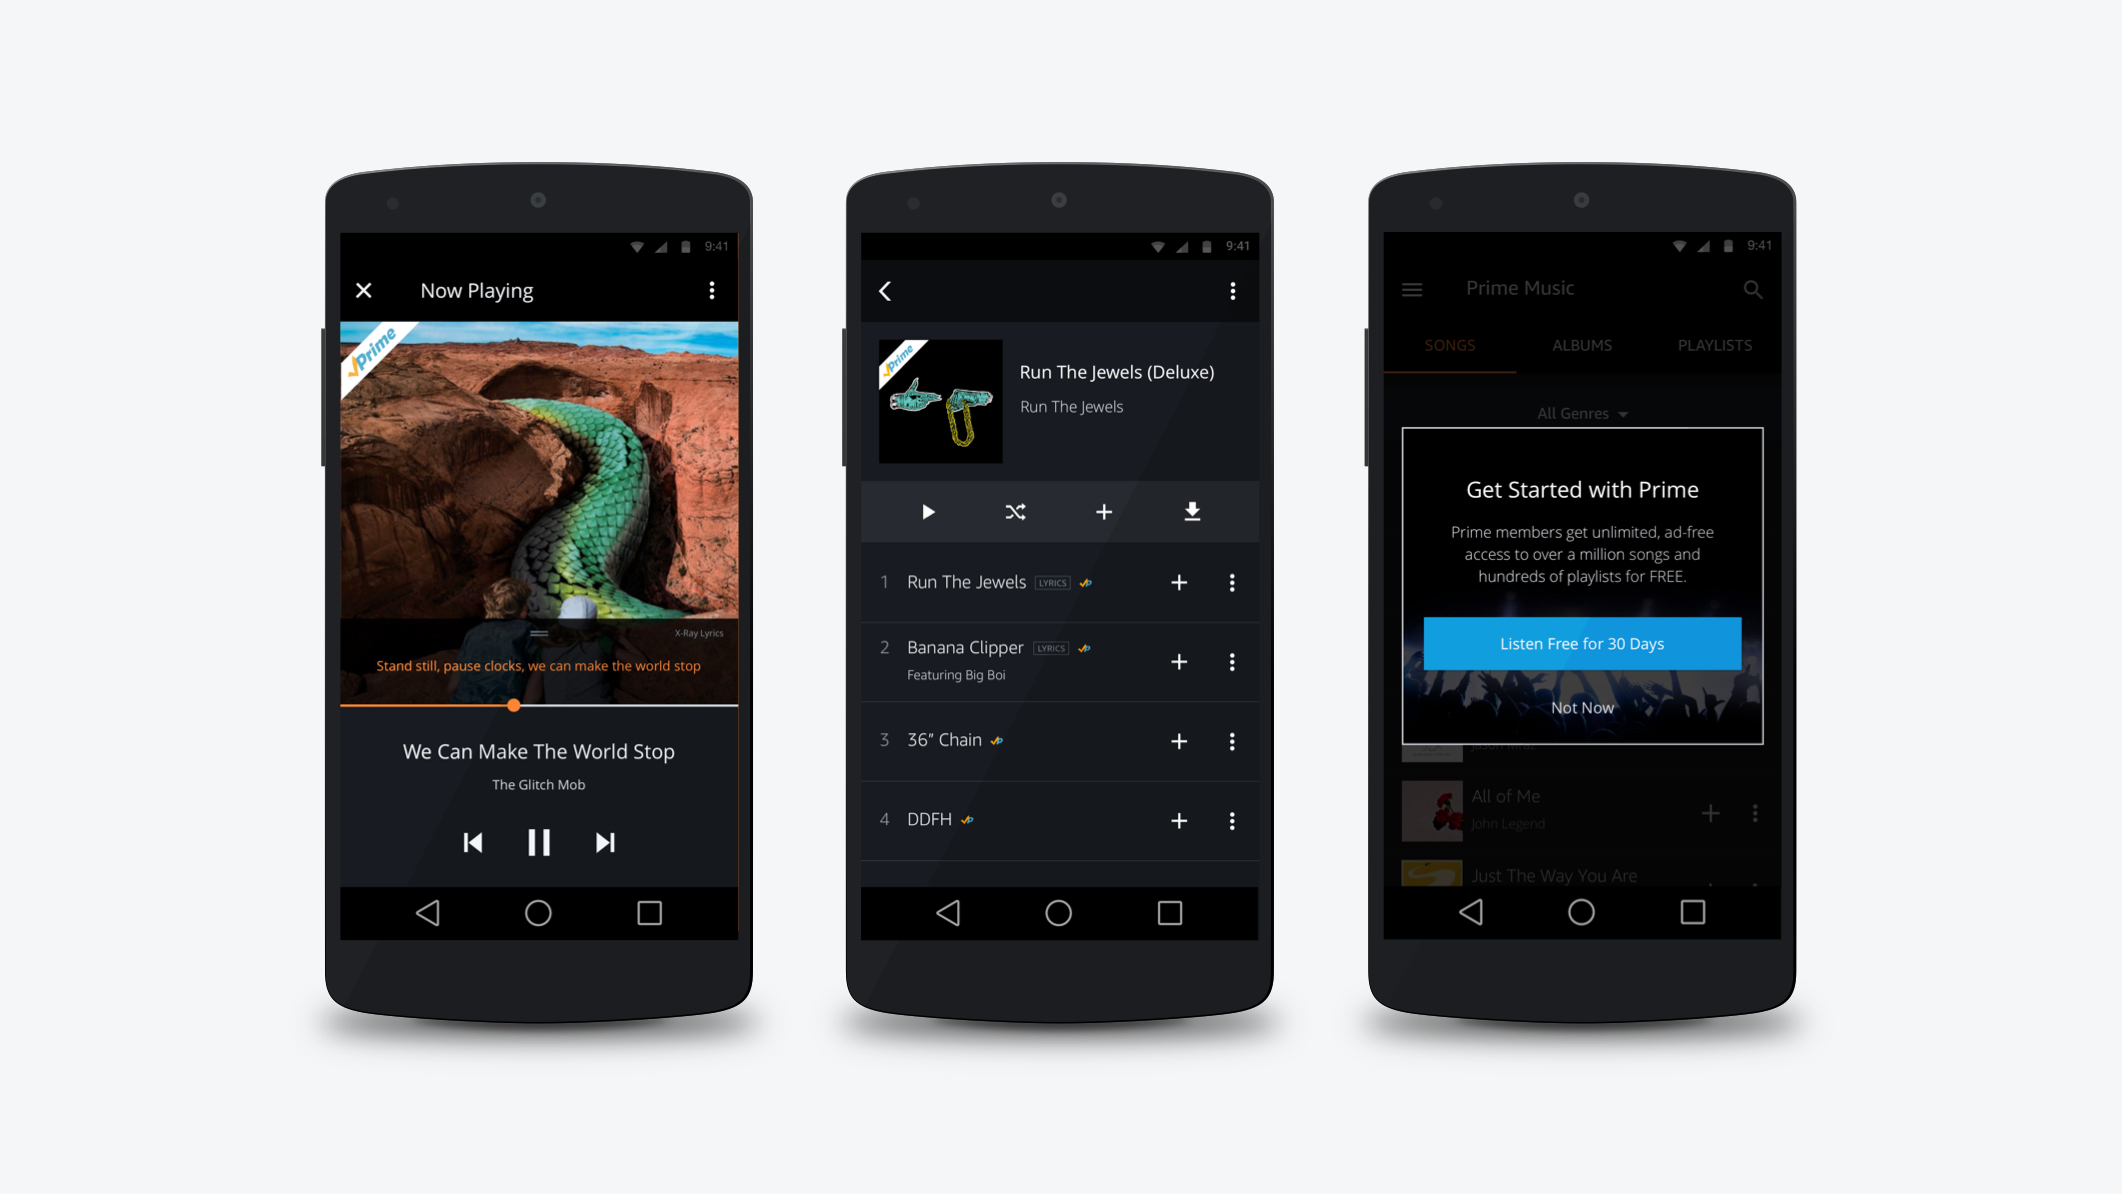 Three design composites showing the 'Now Playing', Album detail page for 'Run the Jewels' and the Prime upsell dialog for non-Prime customers on Android Mobile.